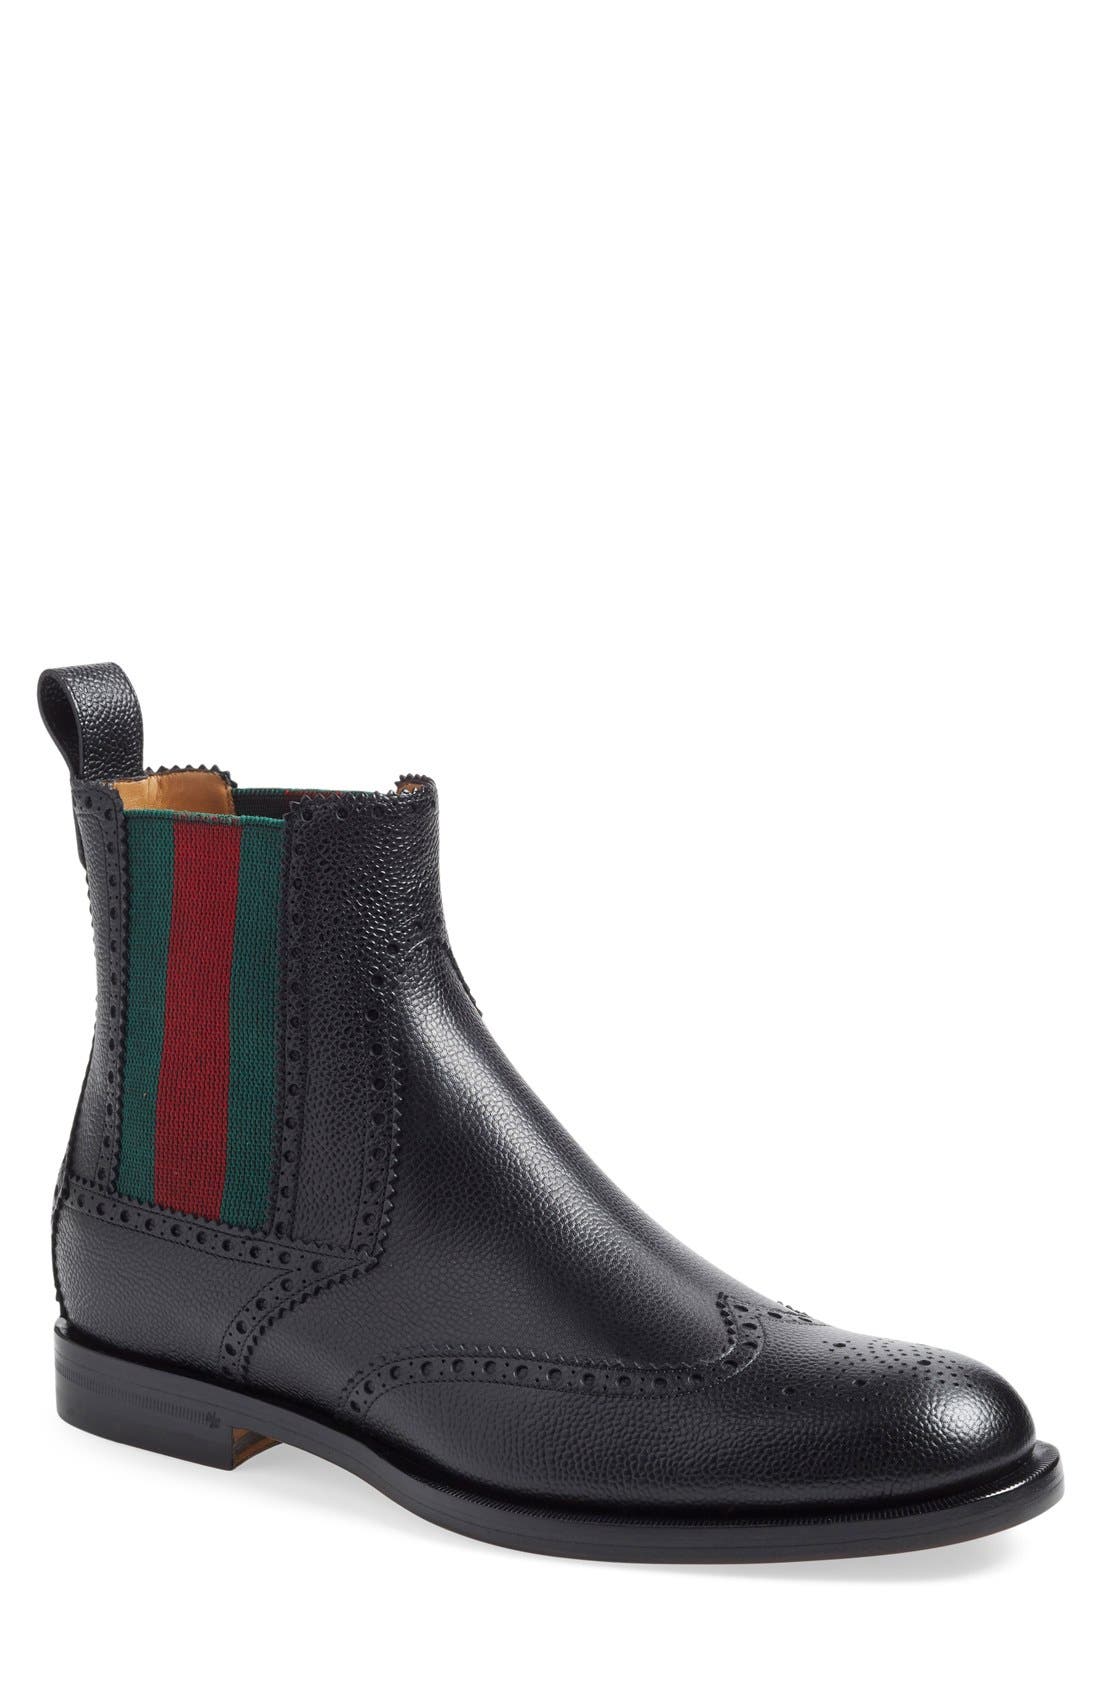 Gucci 'Strand' Wingtip Chelsea Boot 